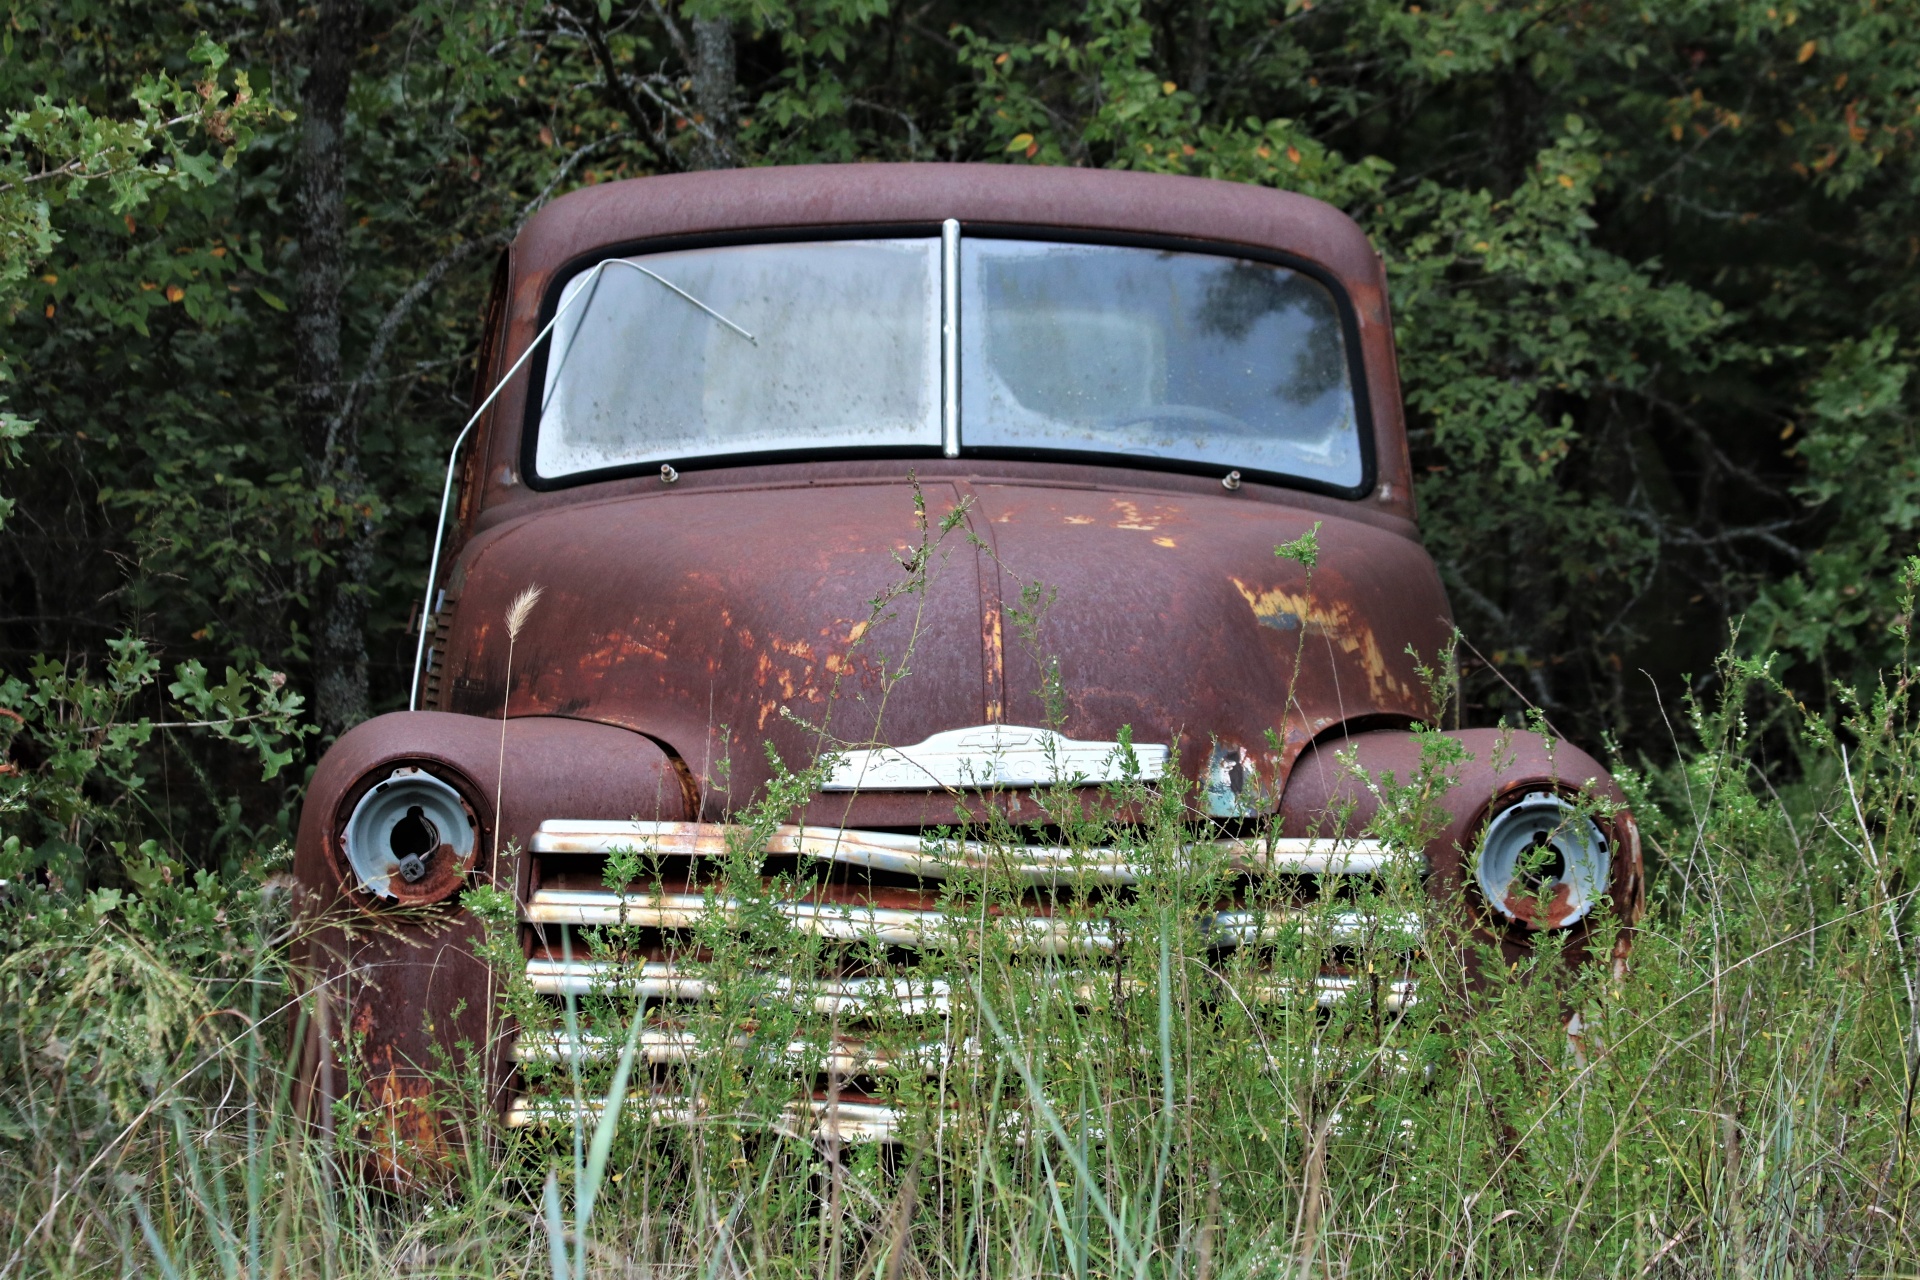 Front view of a 1953 Chevrolet farm truck, abandoned in a country field.